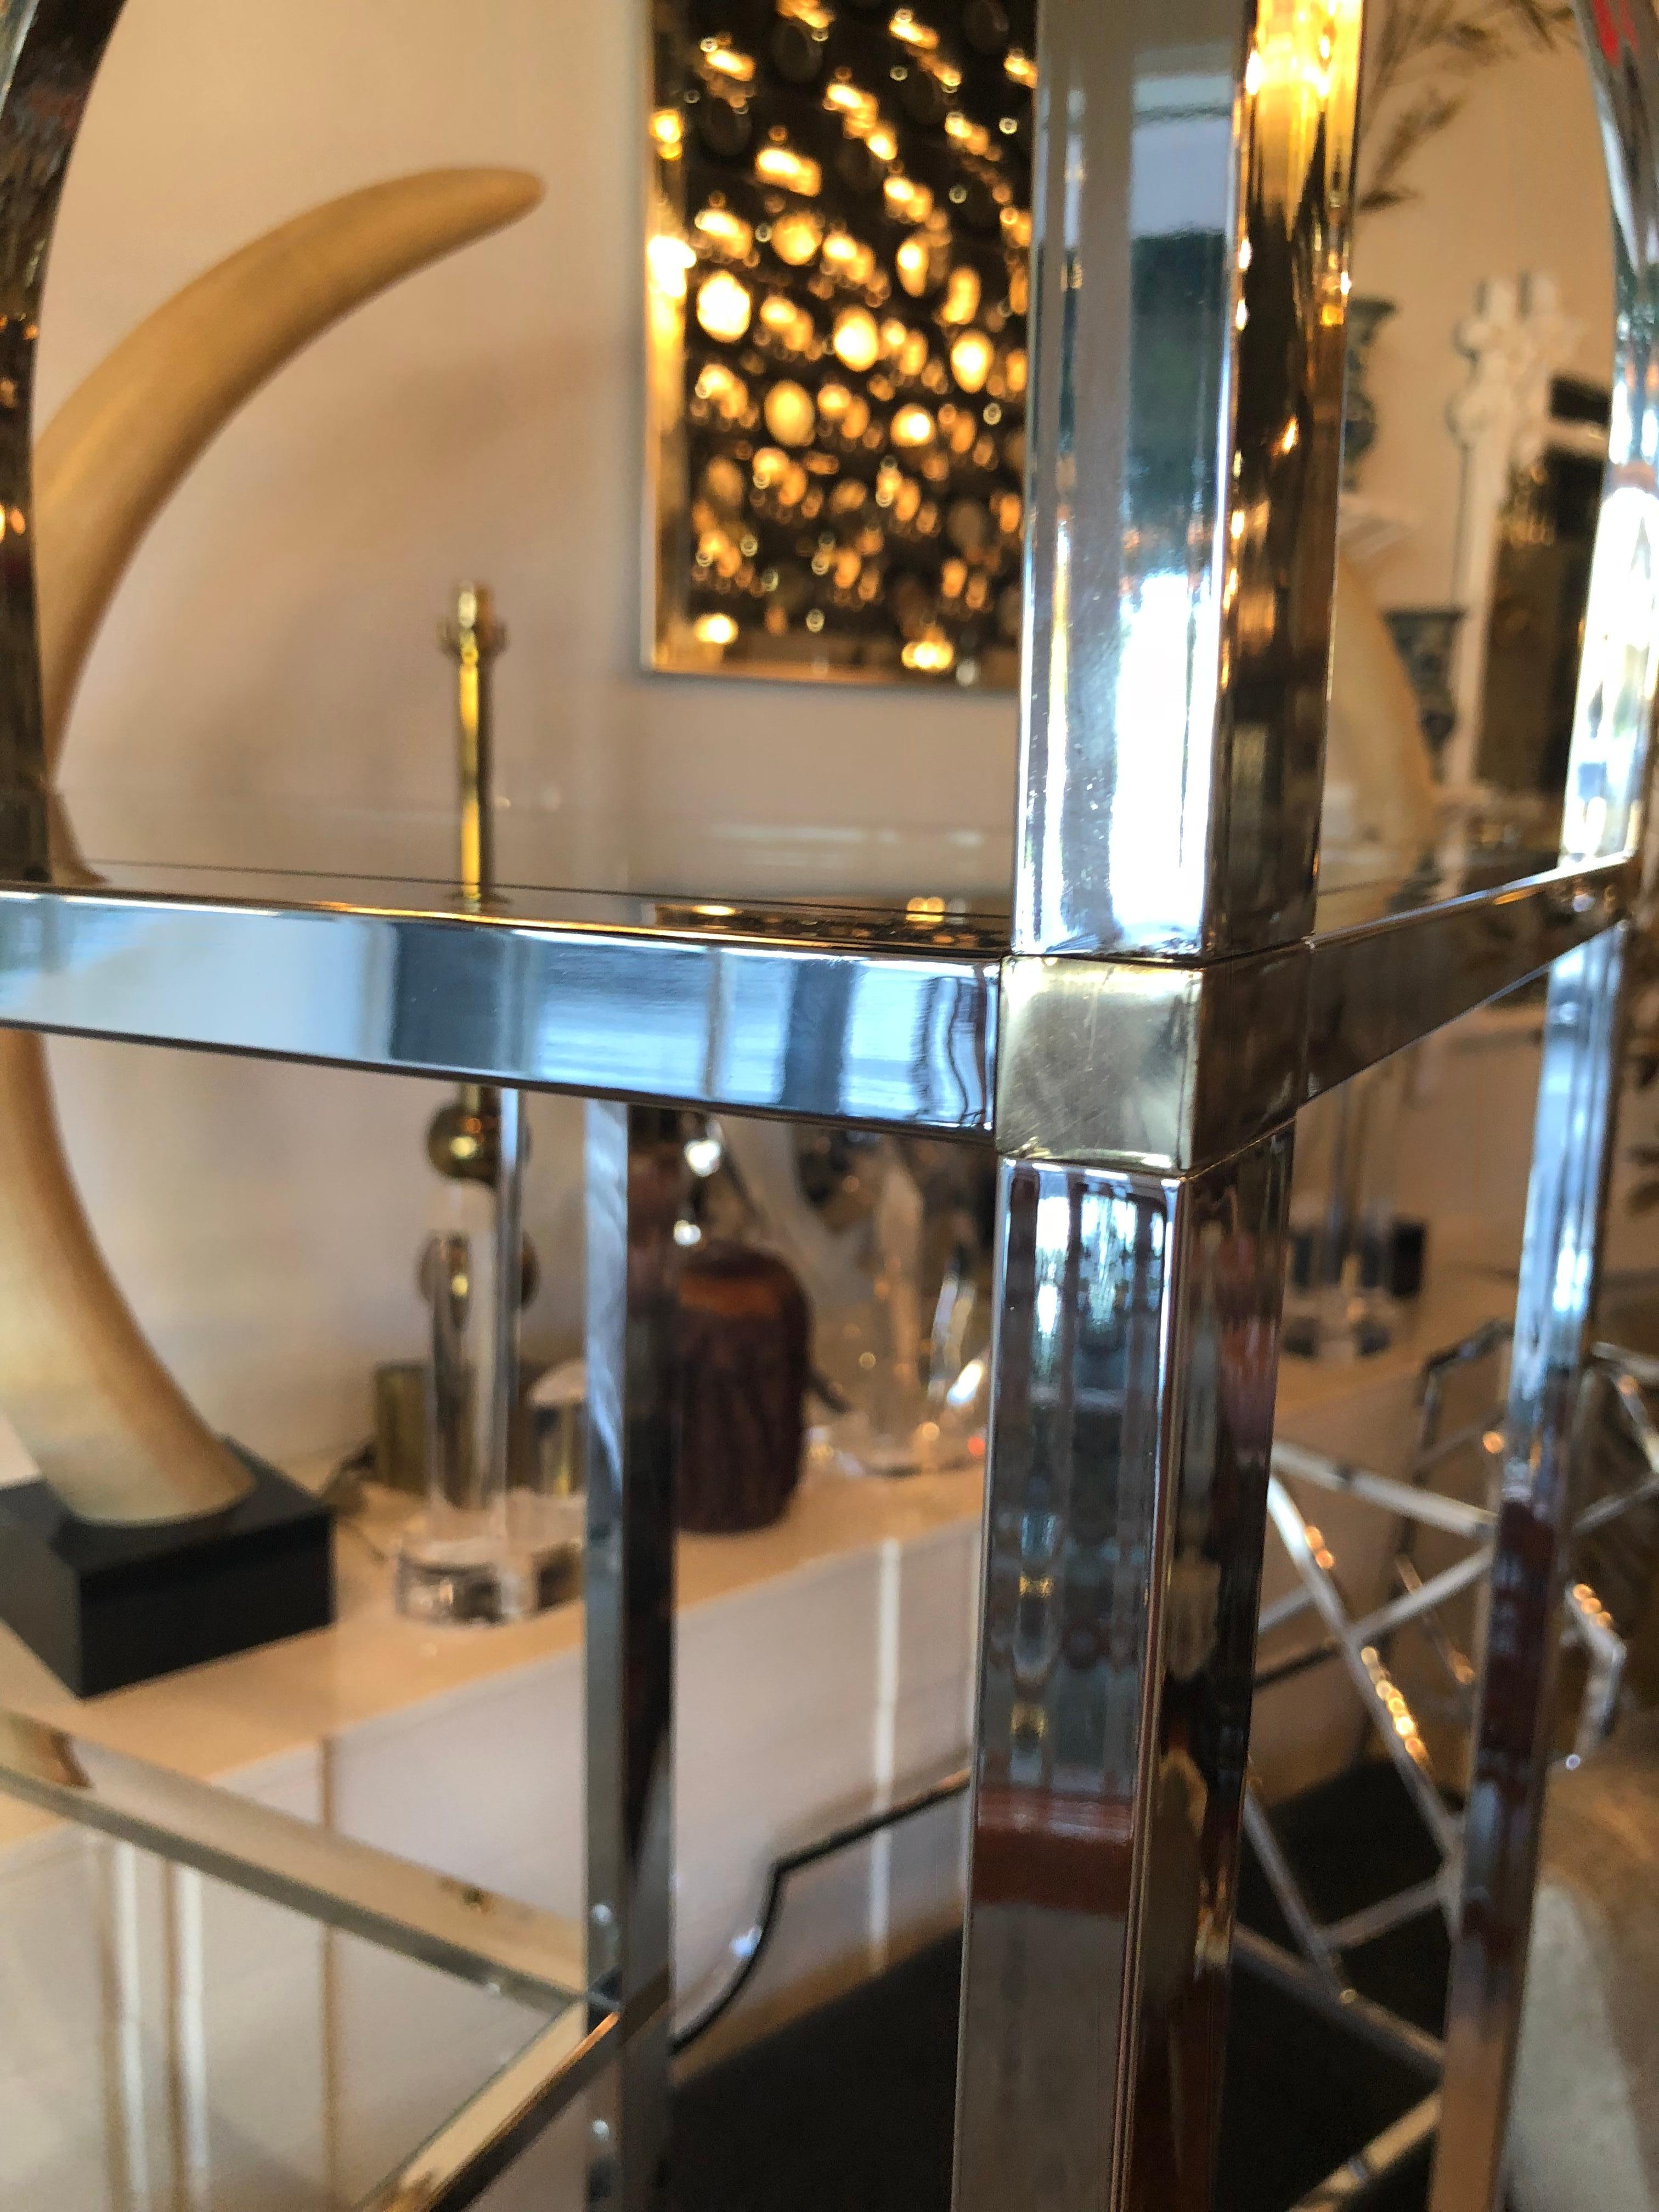 Vintage arched chrome with brass accents display shelf shelves etageres . Chrome has been polished. Glass is new with the exception of the original dark colored glass bottom shelves. In the style of Milo Baughman.
 